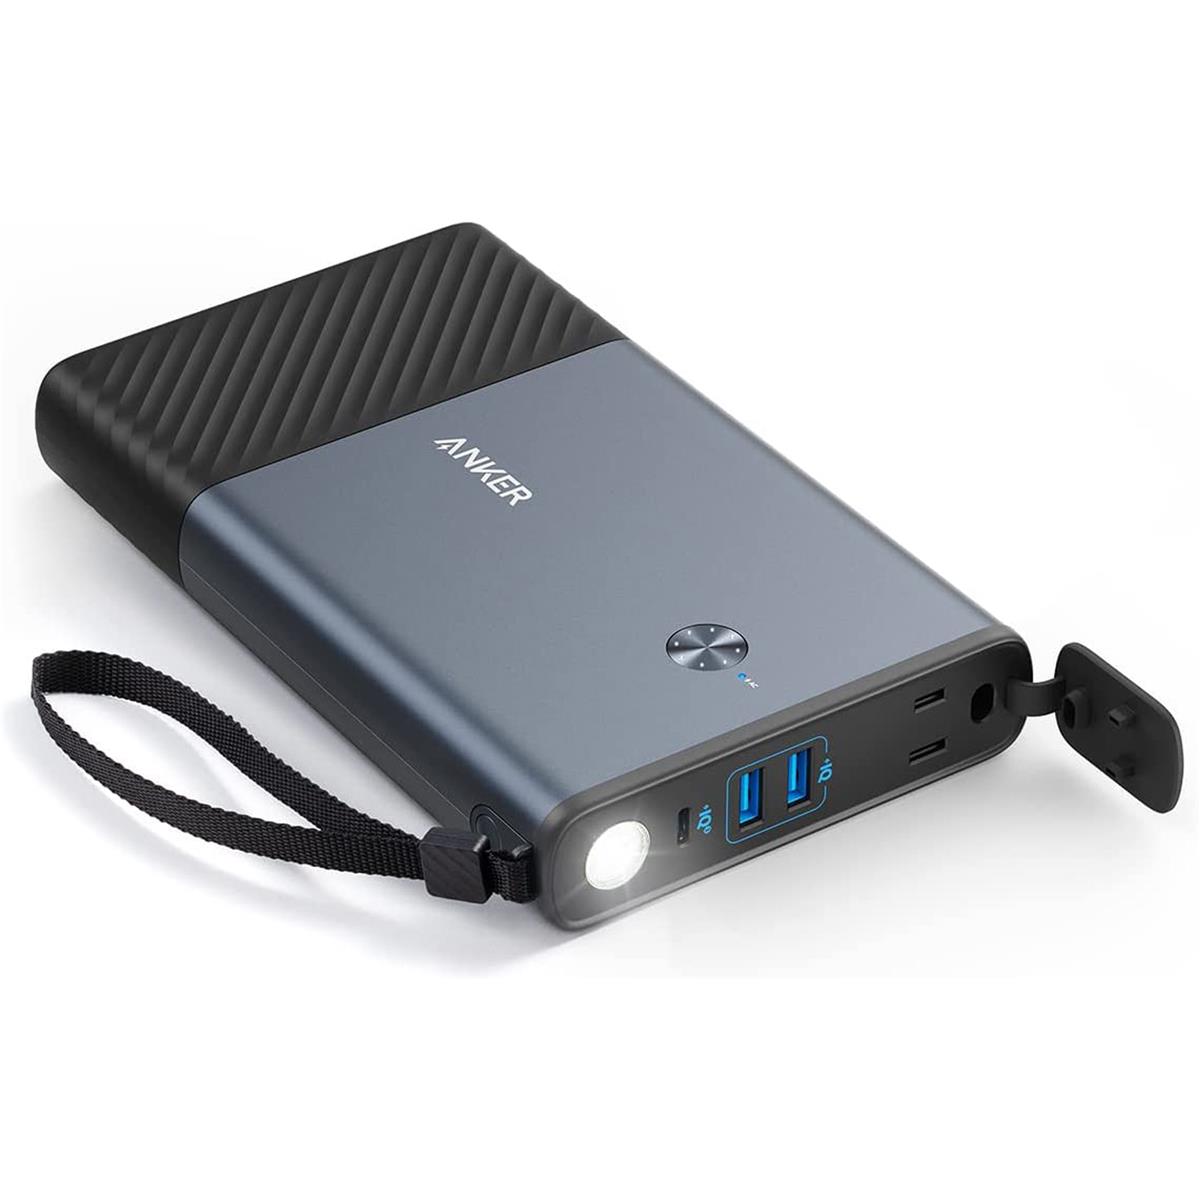 Image of Anker 511 Series 5 90 PowerHouse 87.6Wh Portable Power Bank